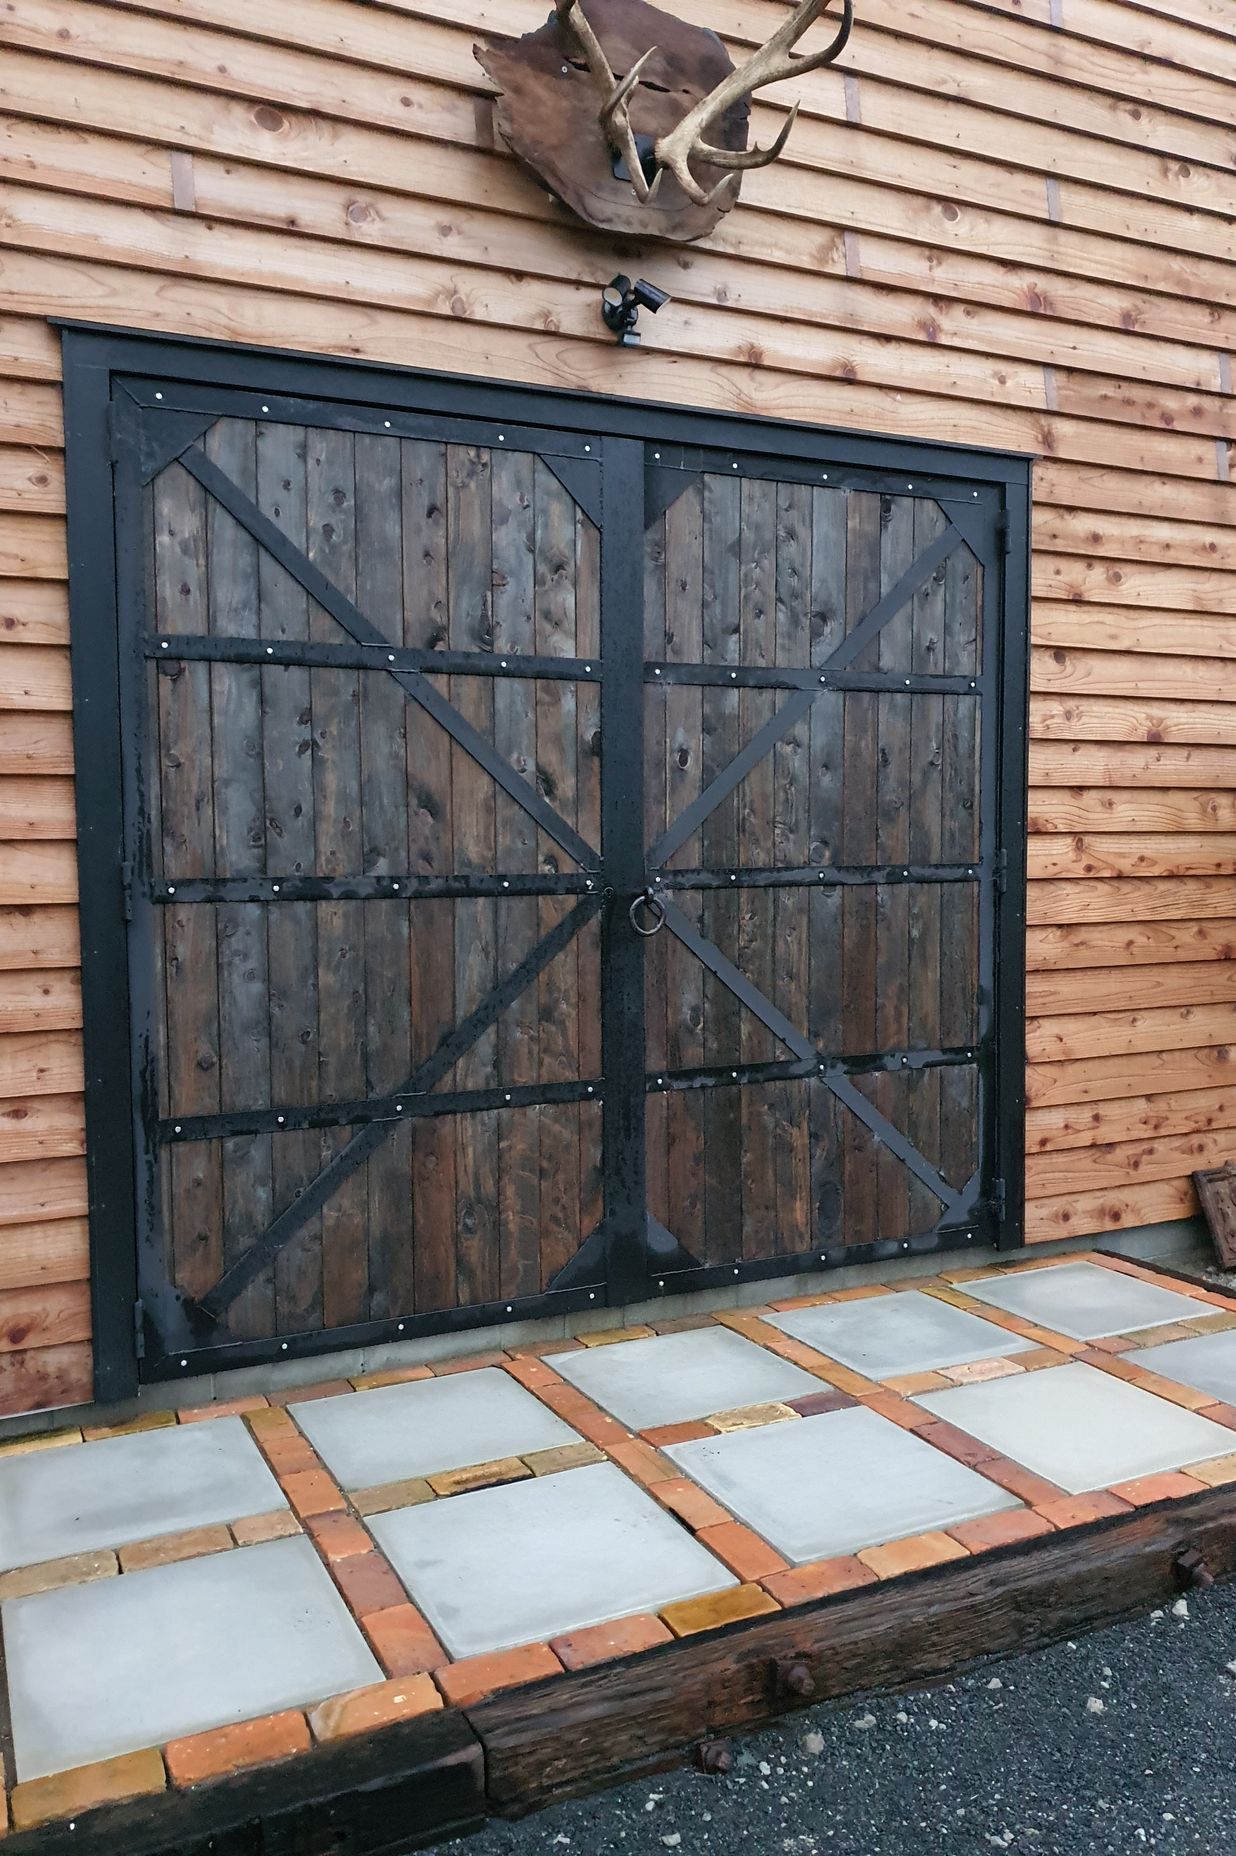 These double barn doors were designed and manufactured by QMD.